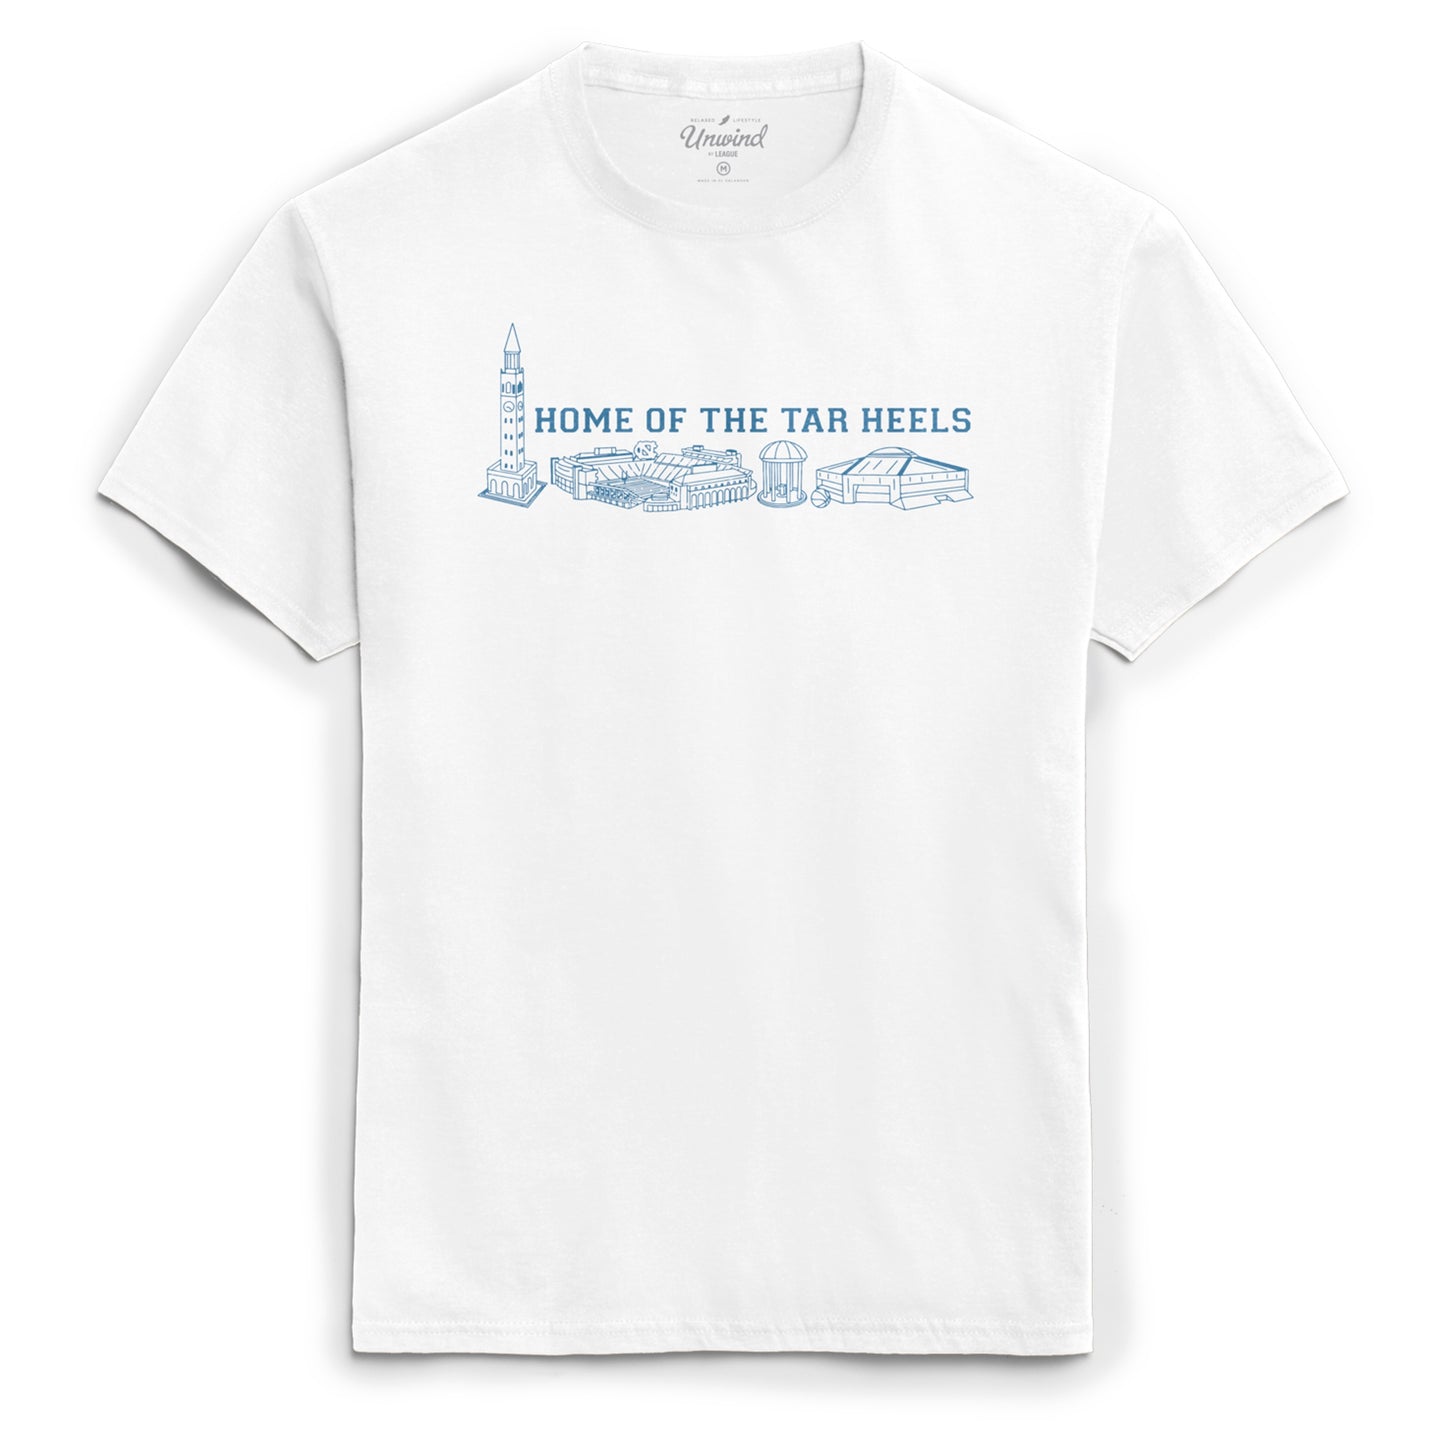 Home of the Tar Heels T-Shirt with UNC Chapel Hill Landmarks